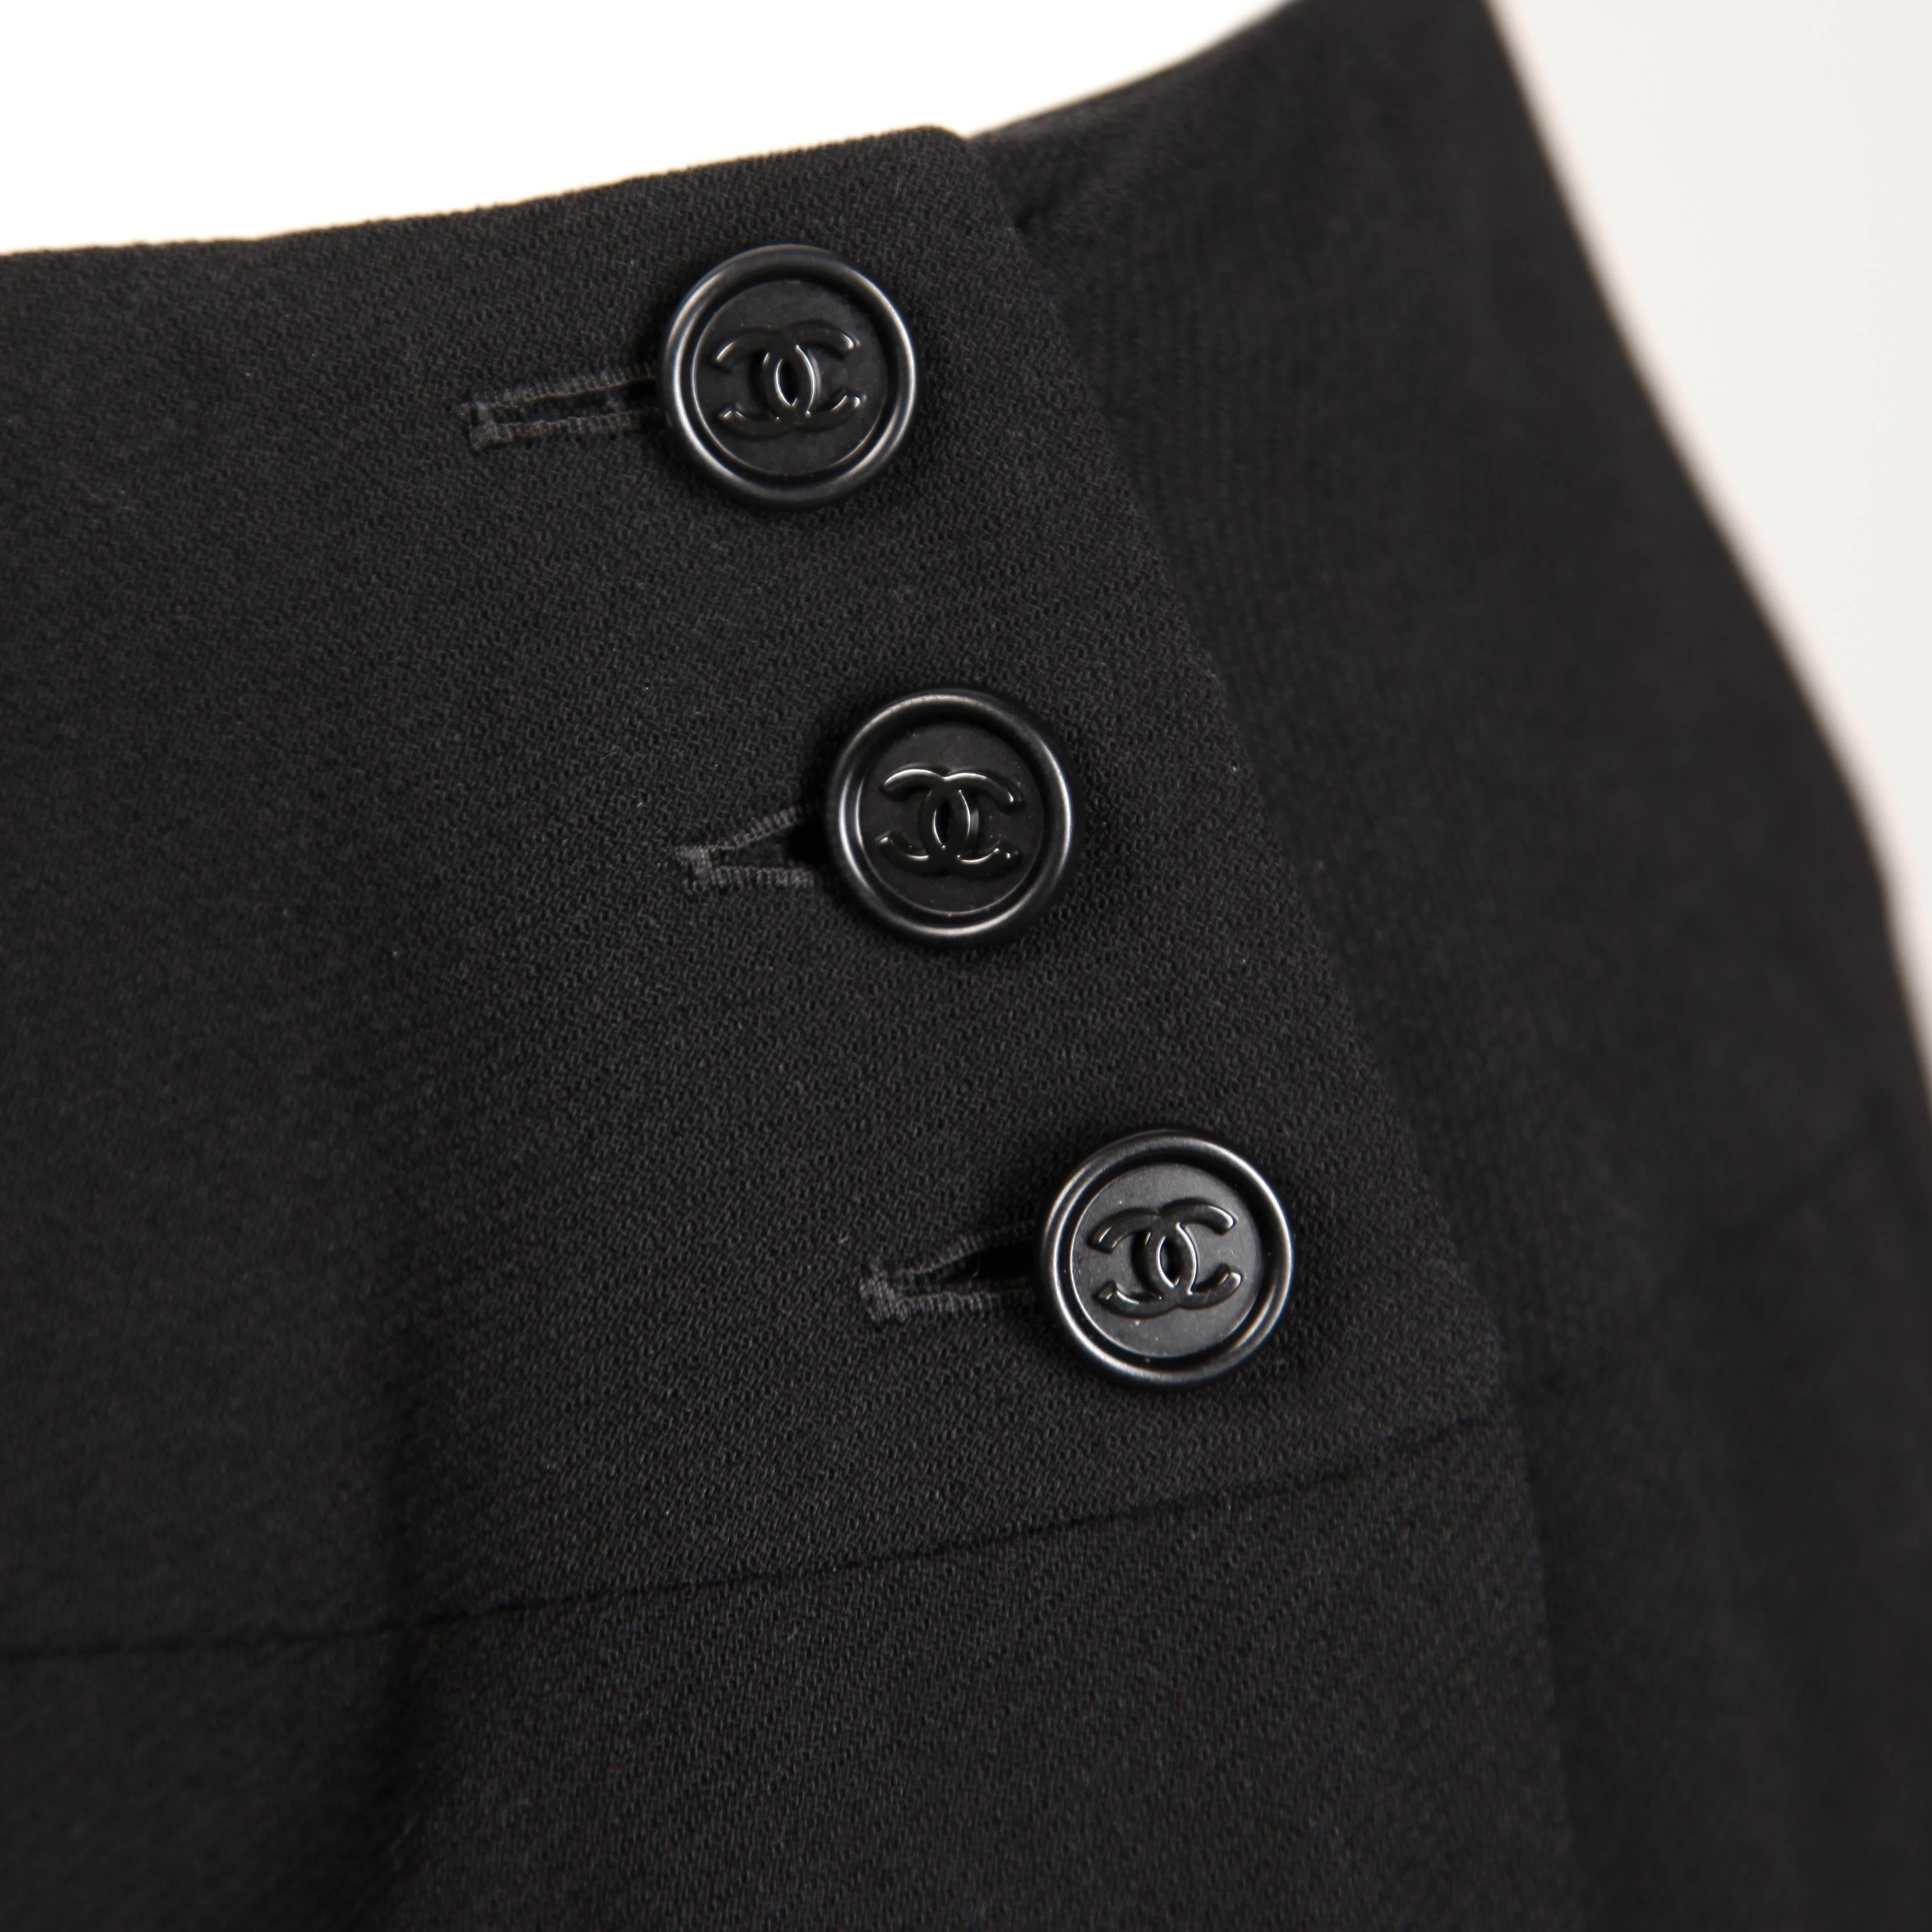 Classic Chanel black wool pleated skirt in a harder-to-find larger size 44. Fully lined in silk, the skirt buttons up on one side with three "CC" buttons. Beautiful construction! This fits like a modern size large. The low waist measures